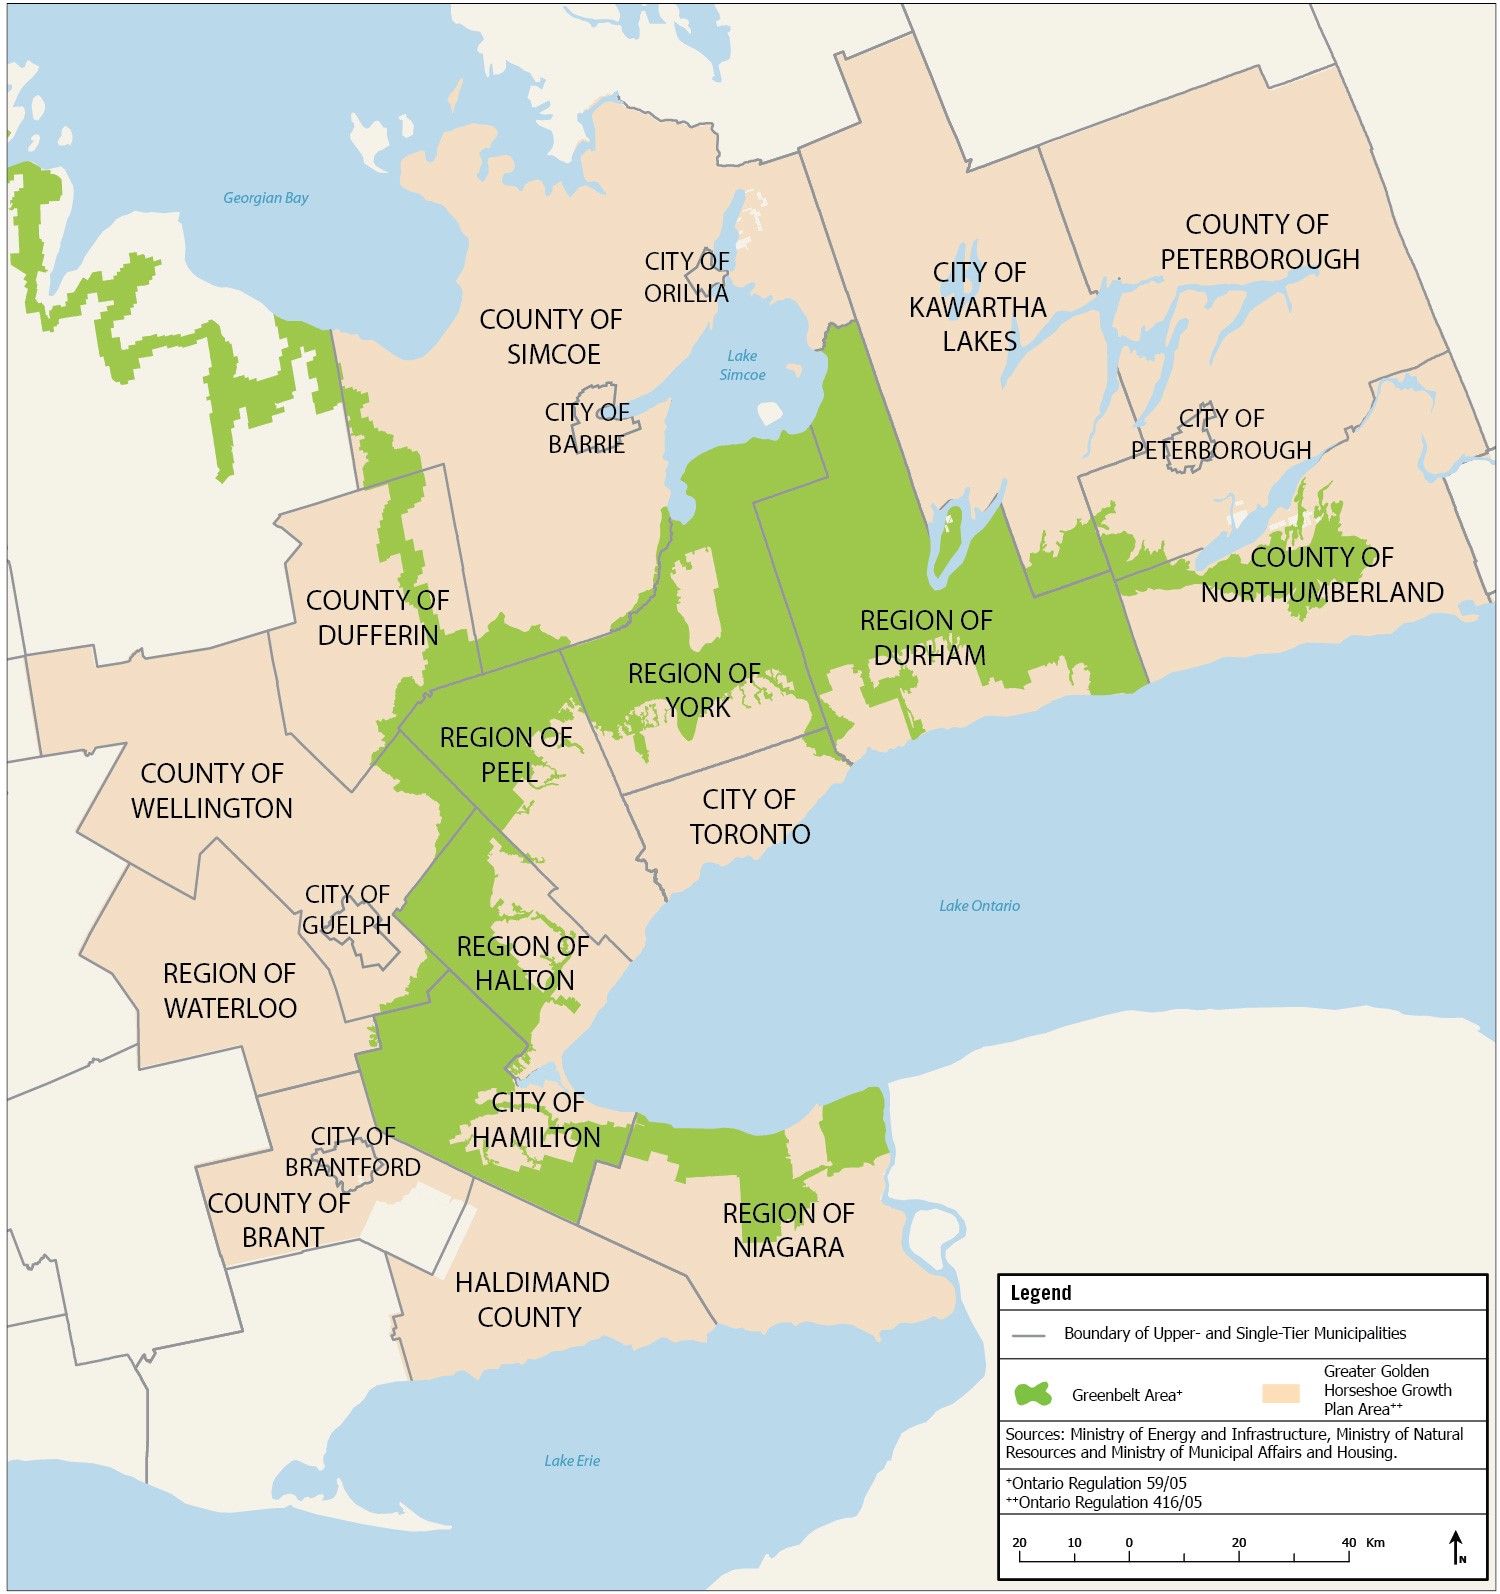 Greater Golden Horseshoe Growth Plan Area (map)